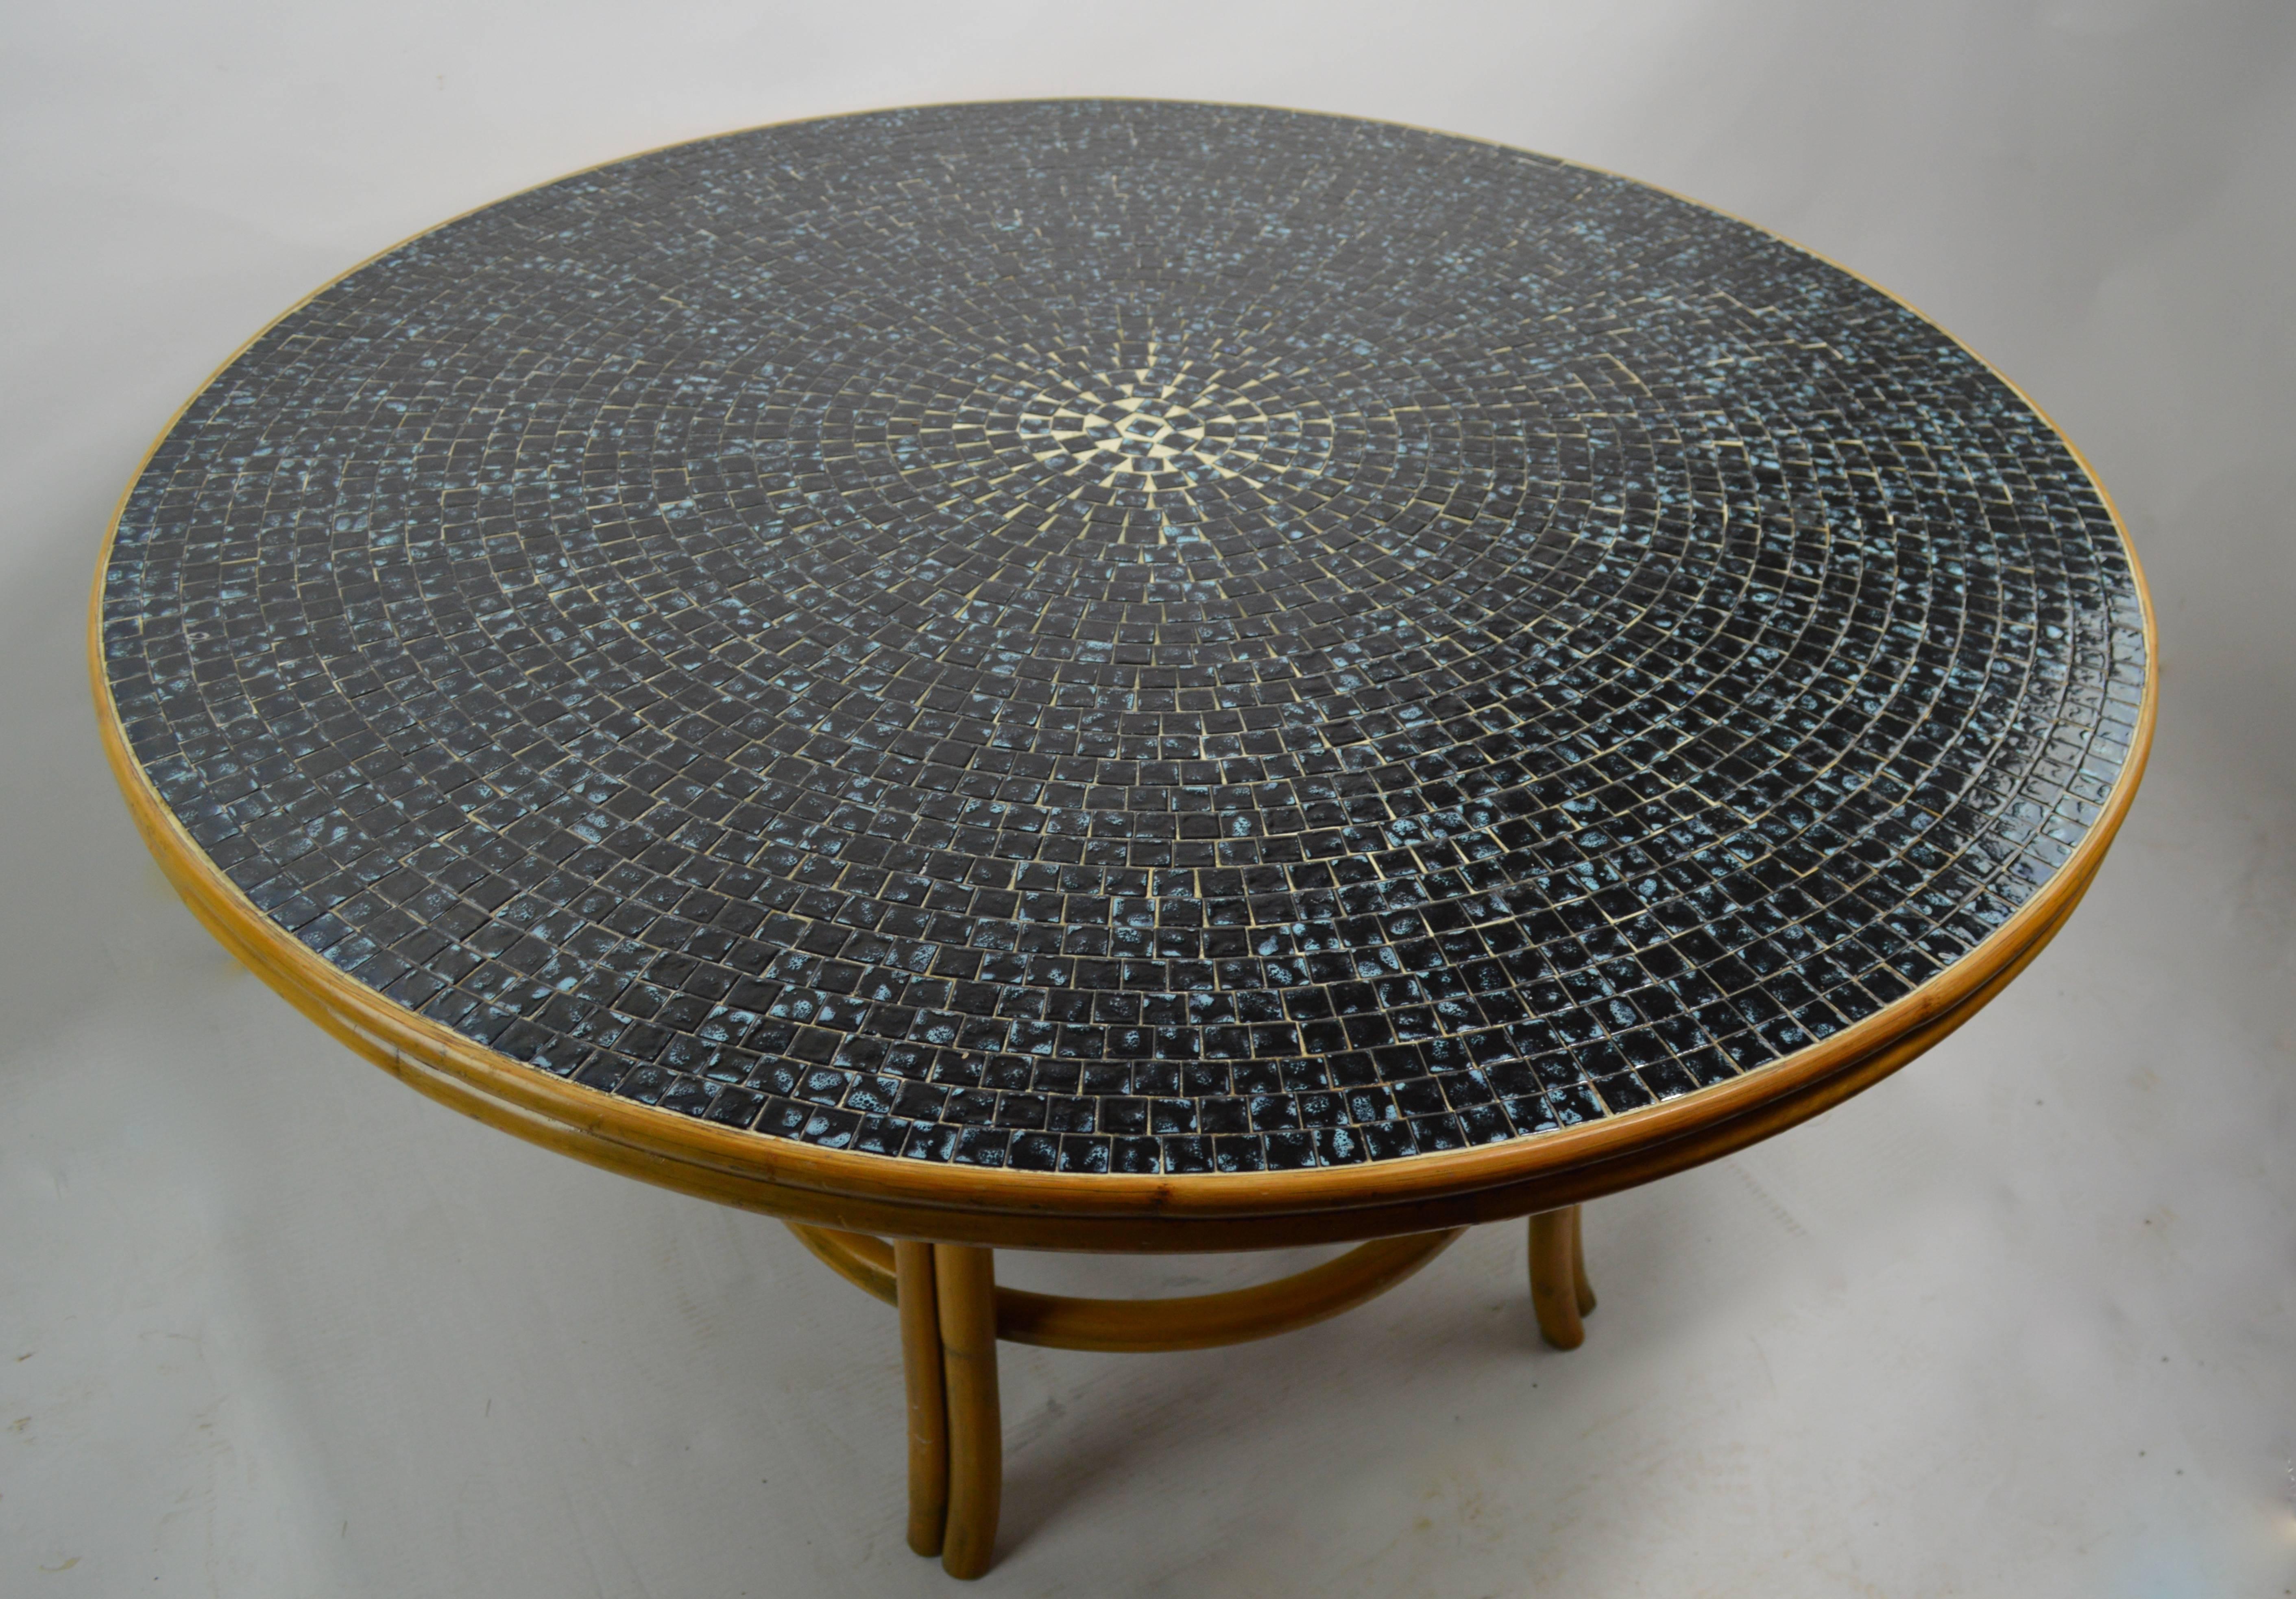 20th Century Bamboo and Tile Dining Centre Table after McGuire